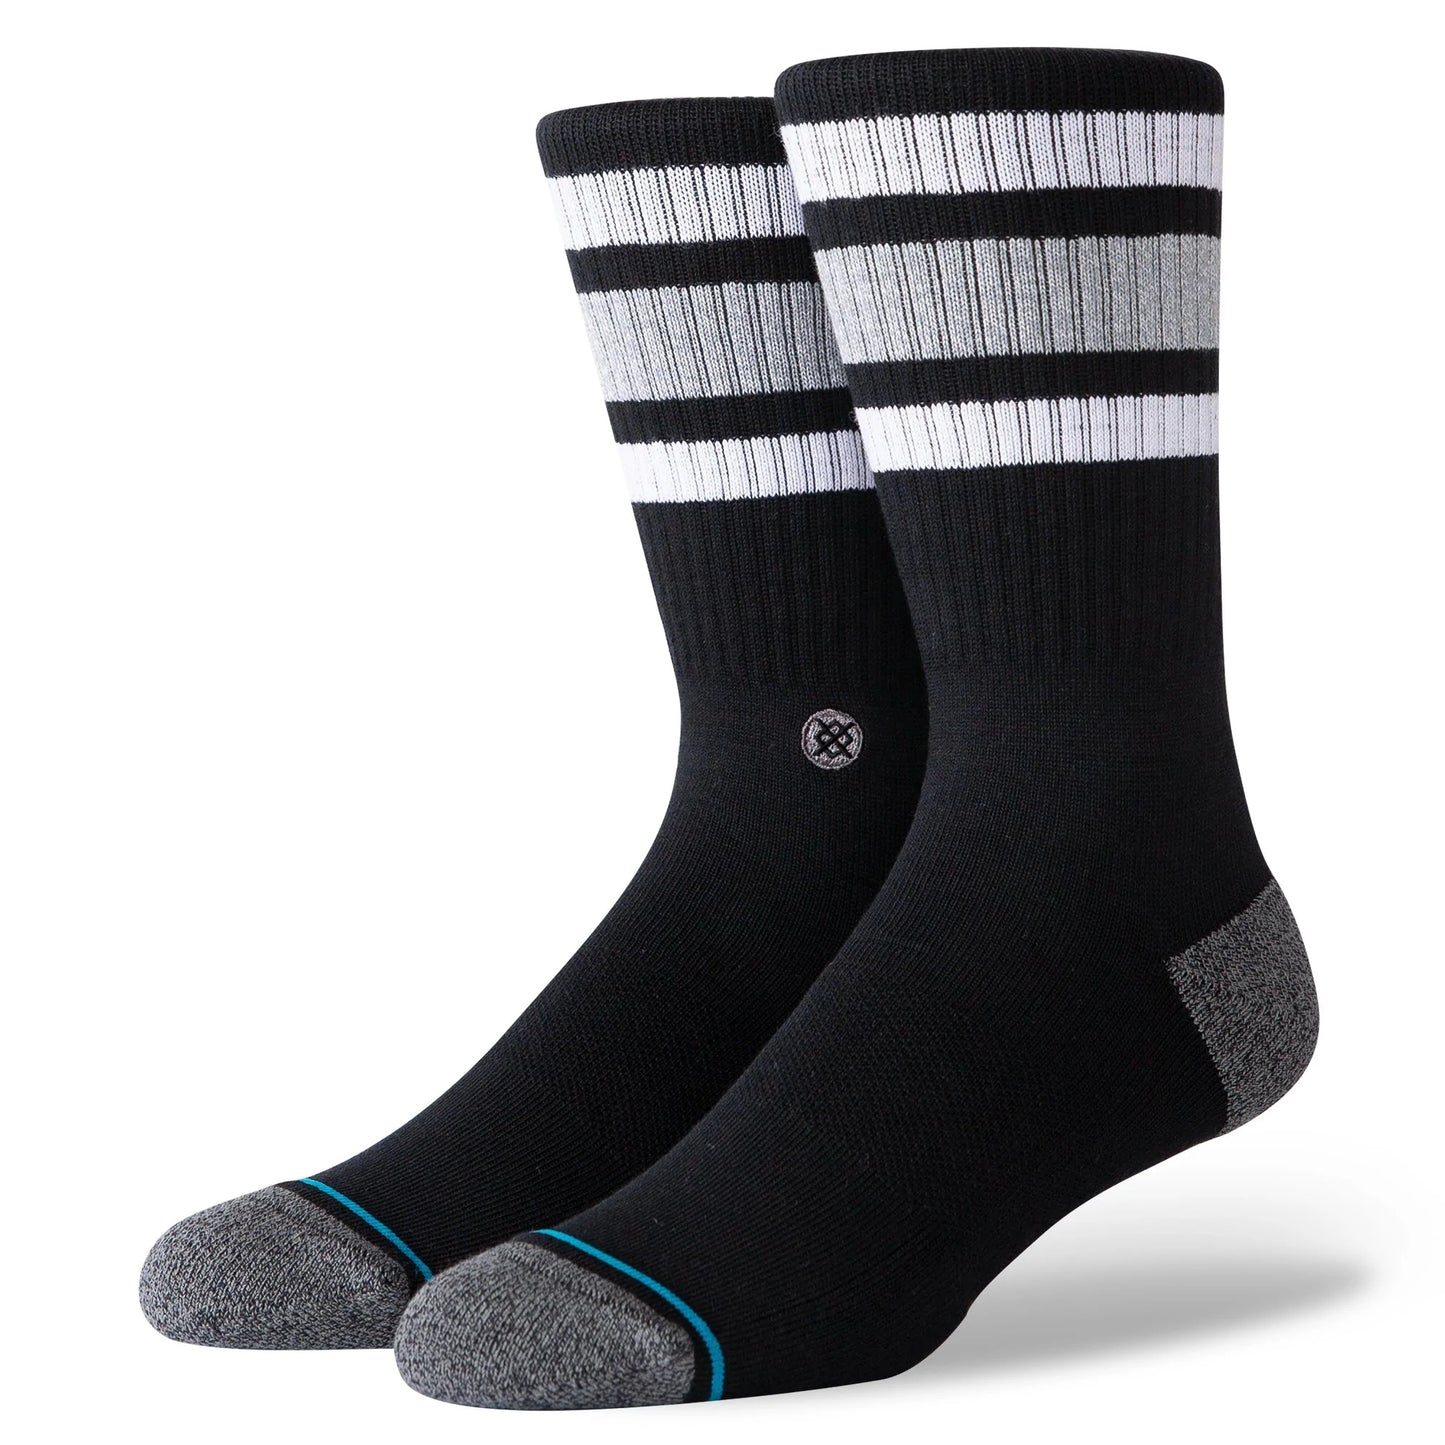 Contrast Clothing Worthing black cotton socks with white stripe